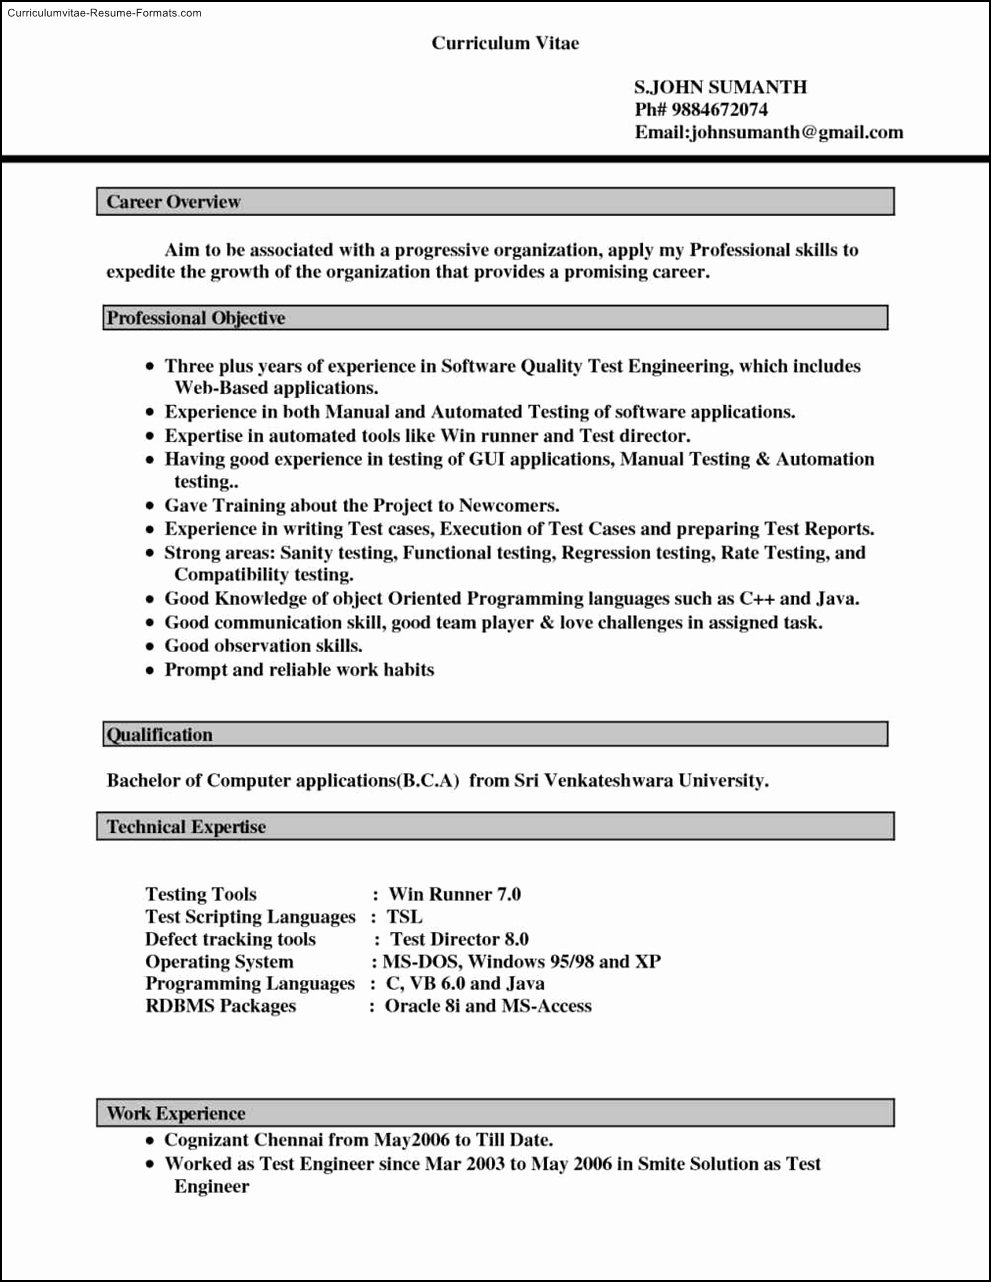 Free Resume Templates for Microsoft Word 2007 Free